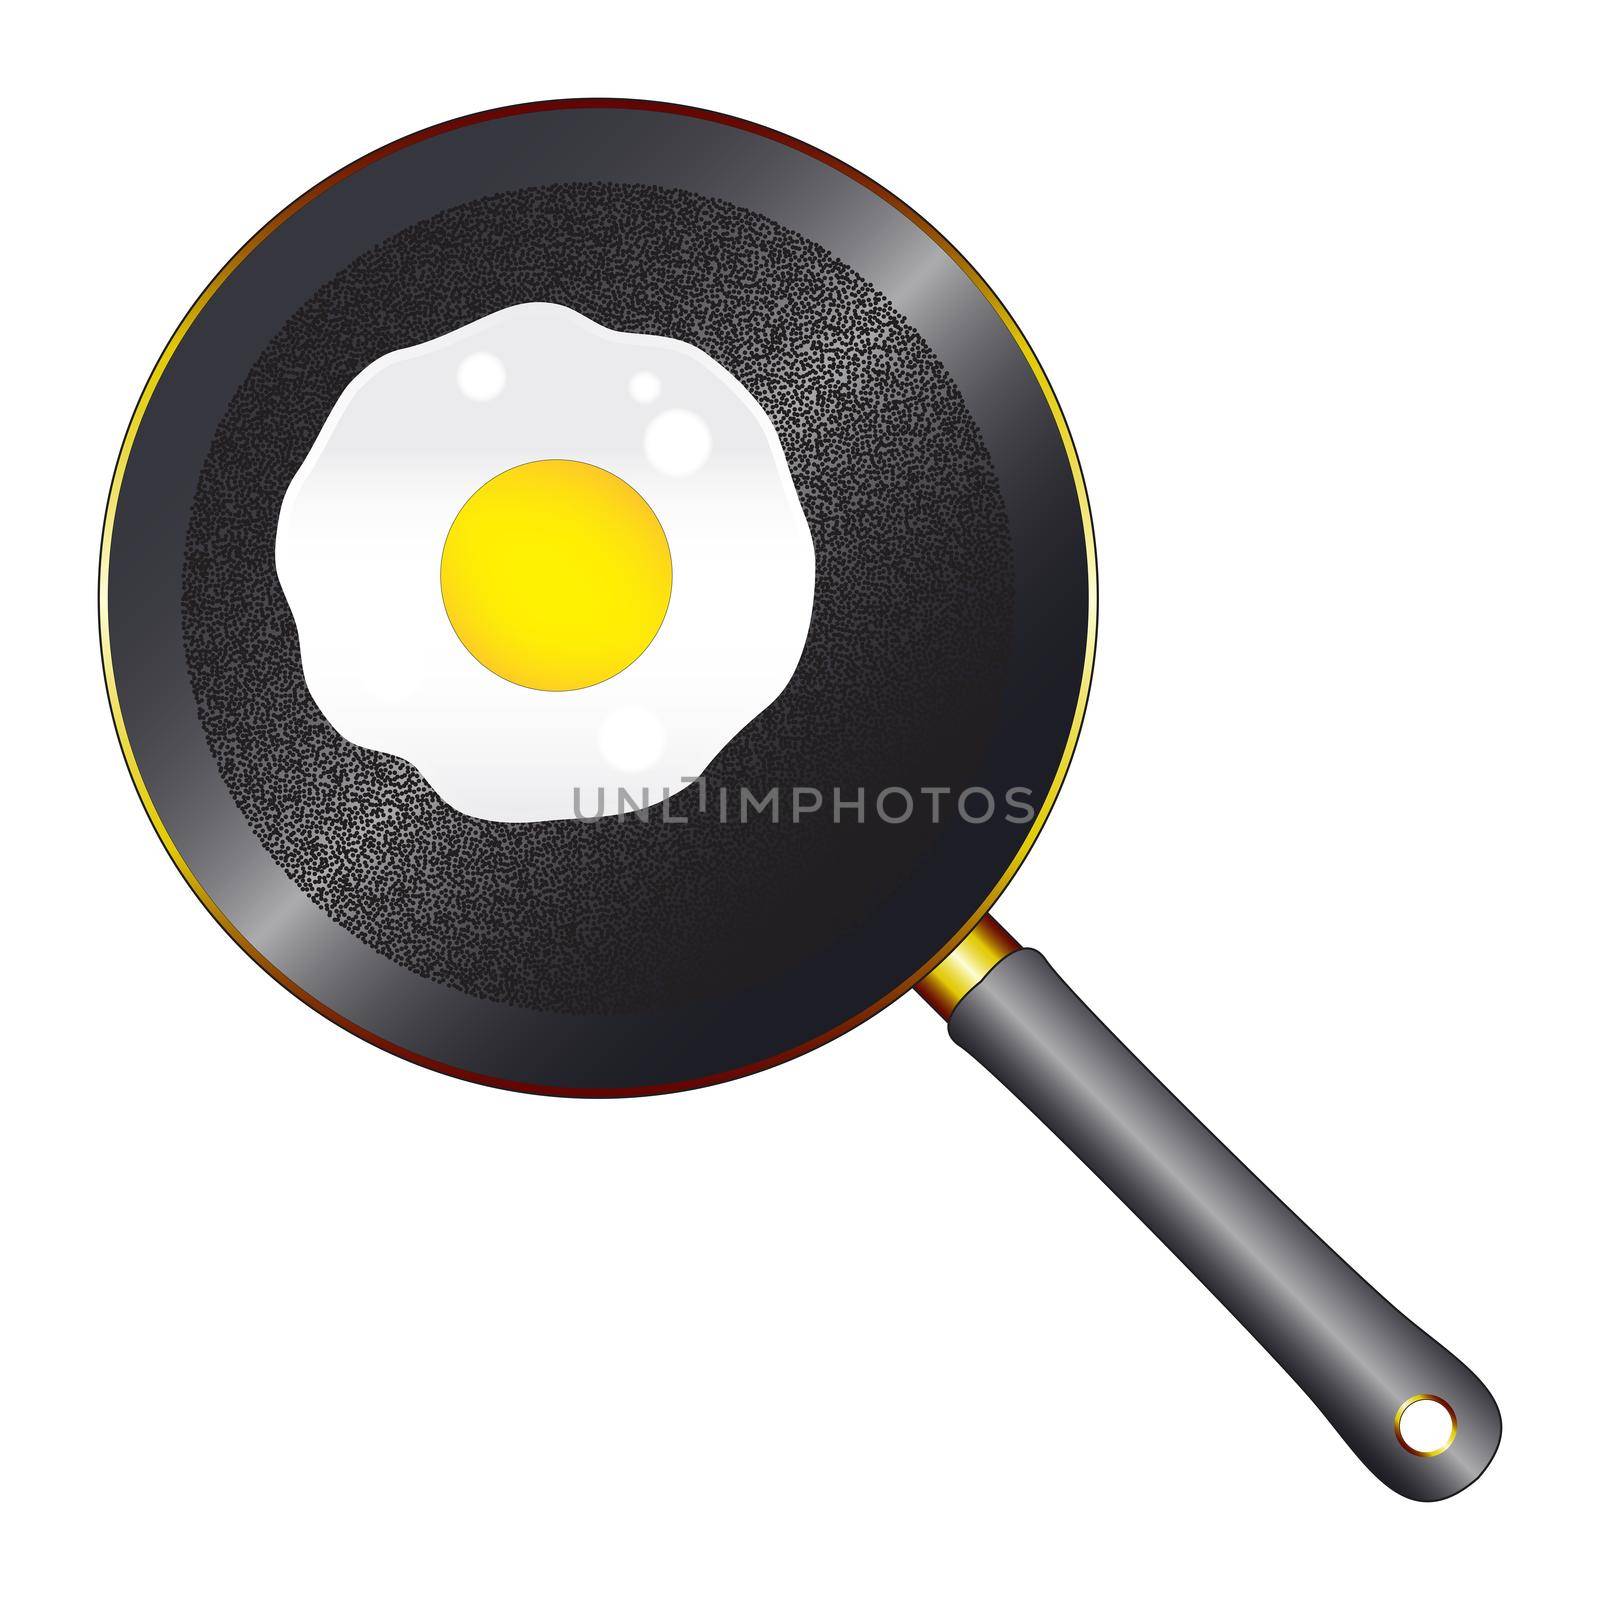 A black metal frying pan with wooden handle and stipple base on a white background with a single frying egg